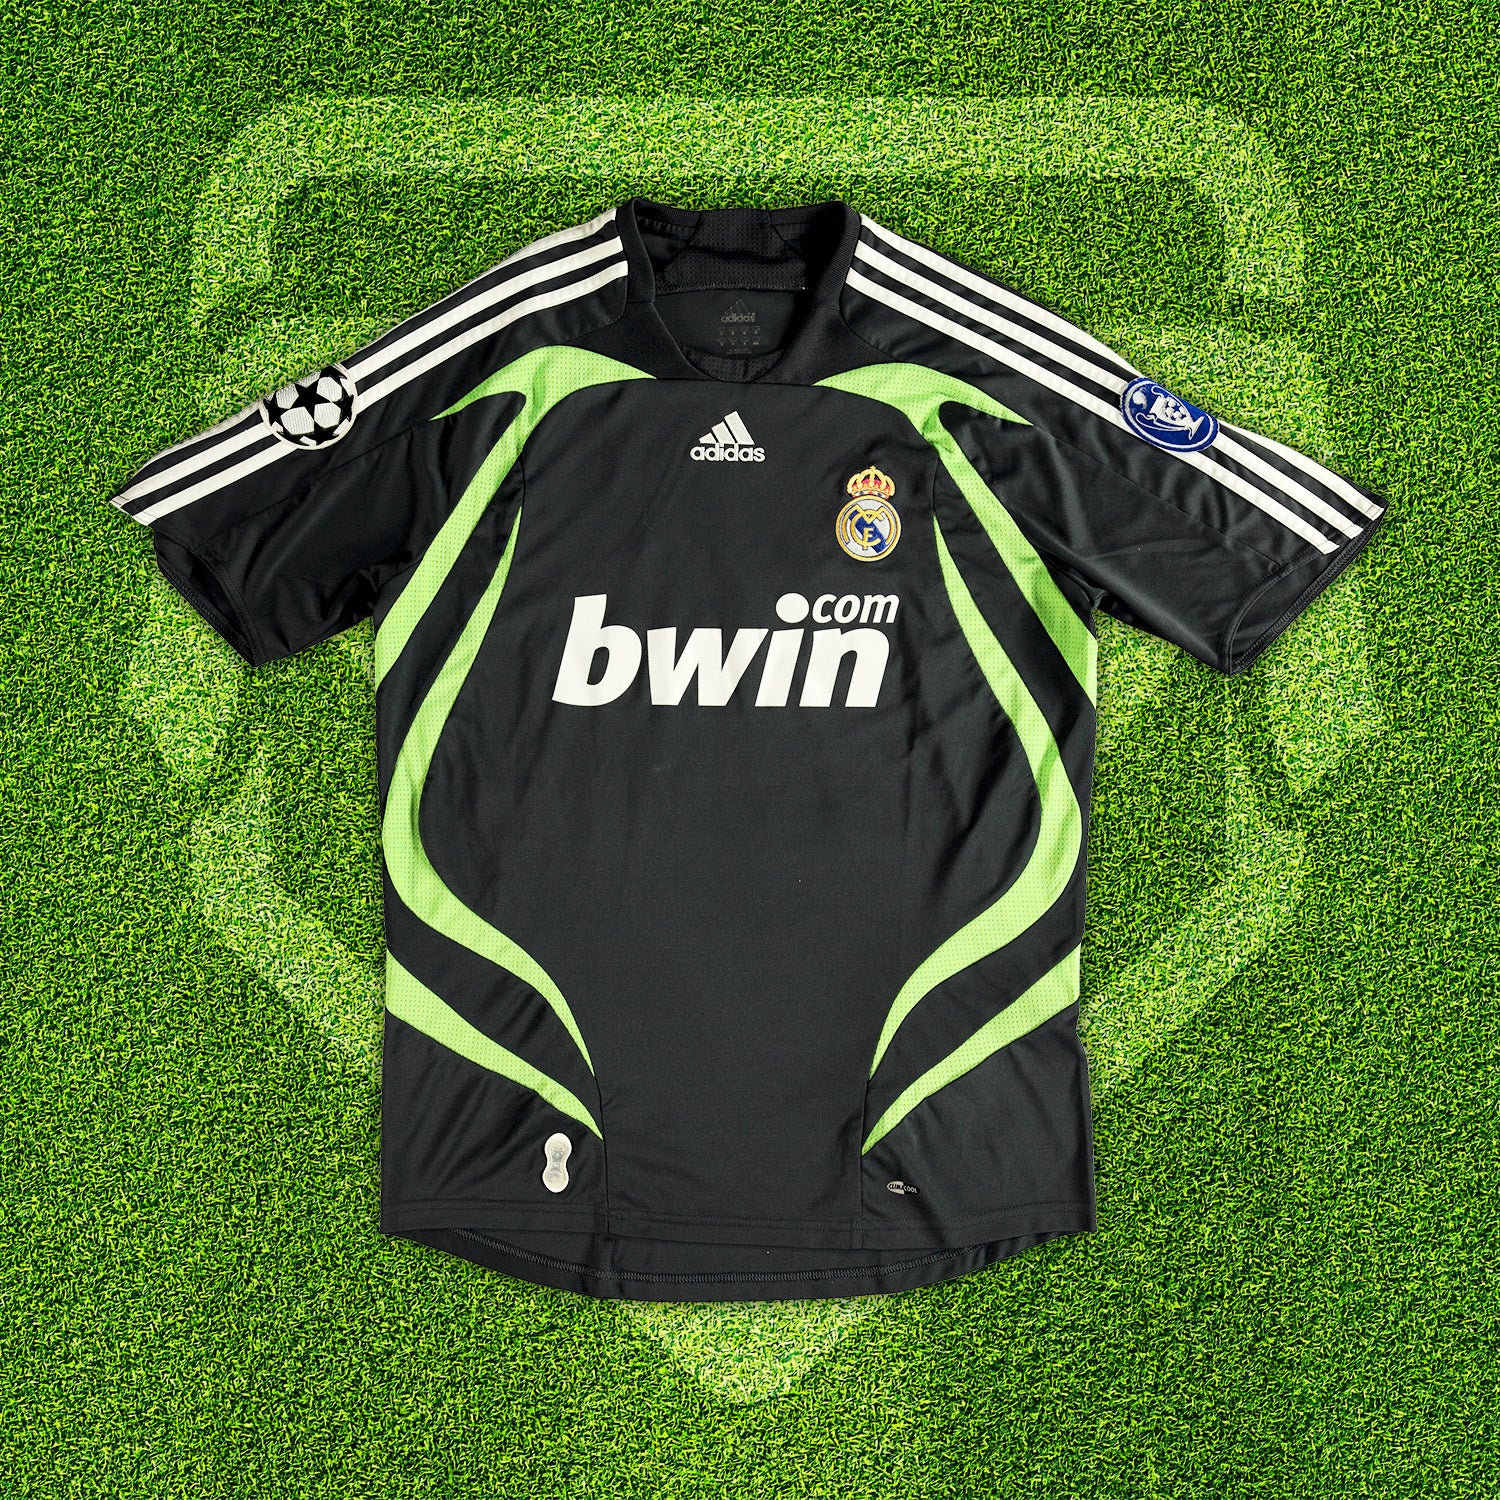 2007-08 Real Madrid Third shirt - Wesley Sneijder (M)